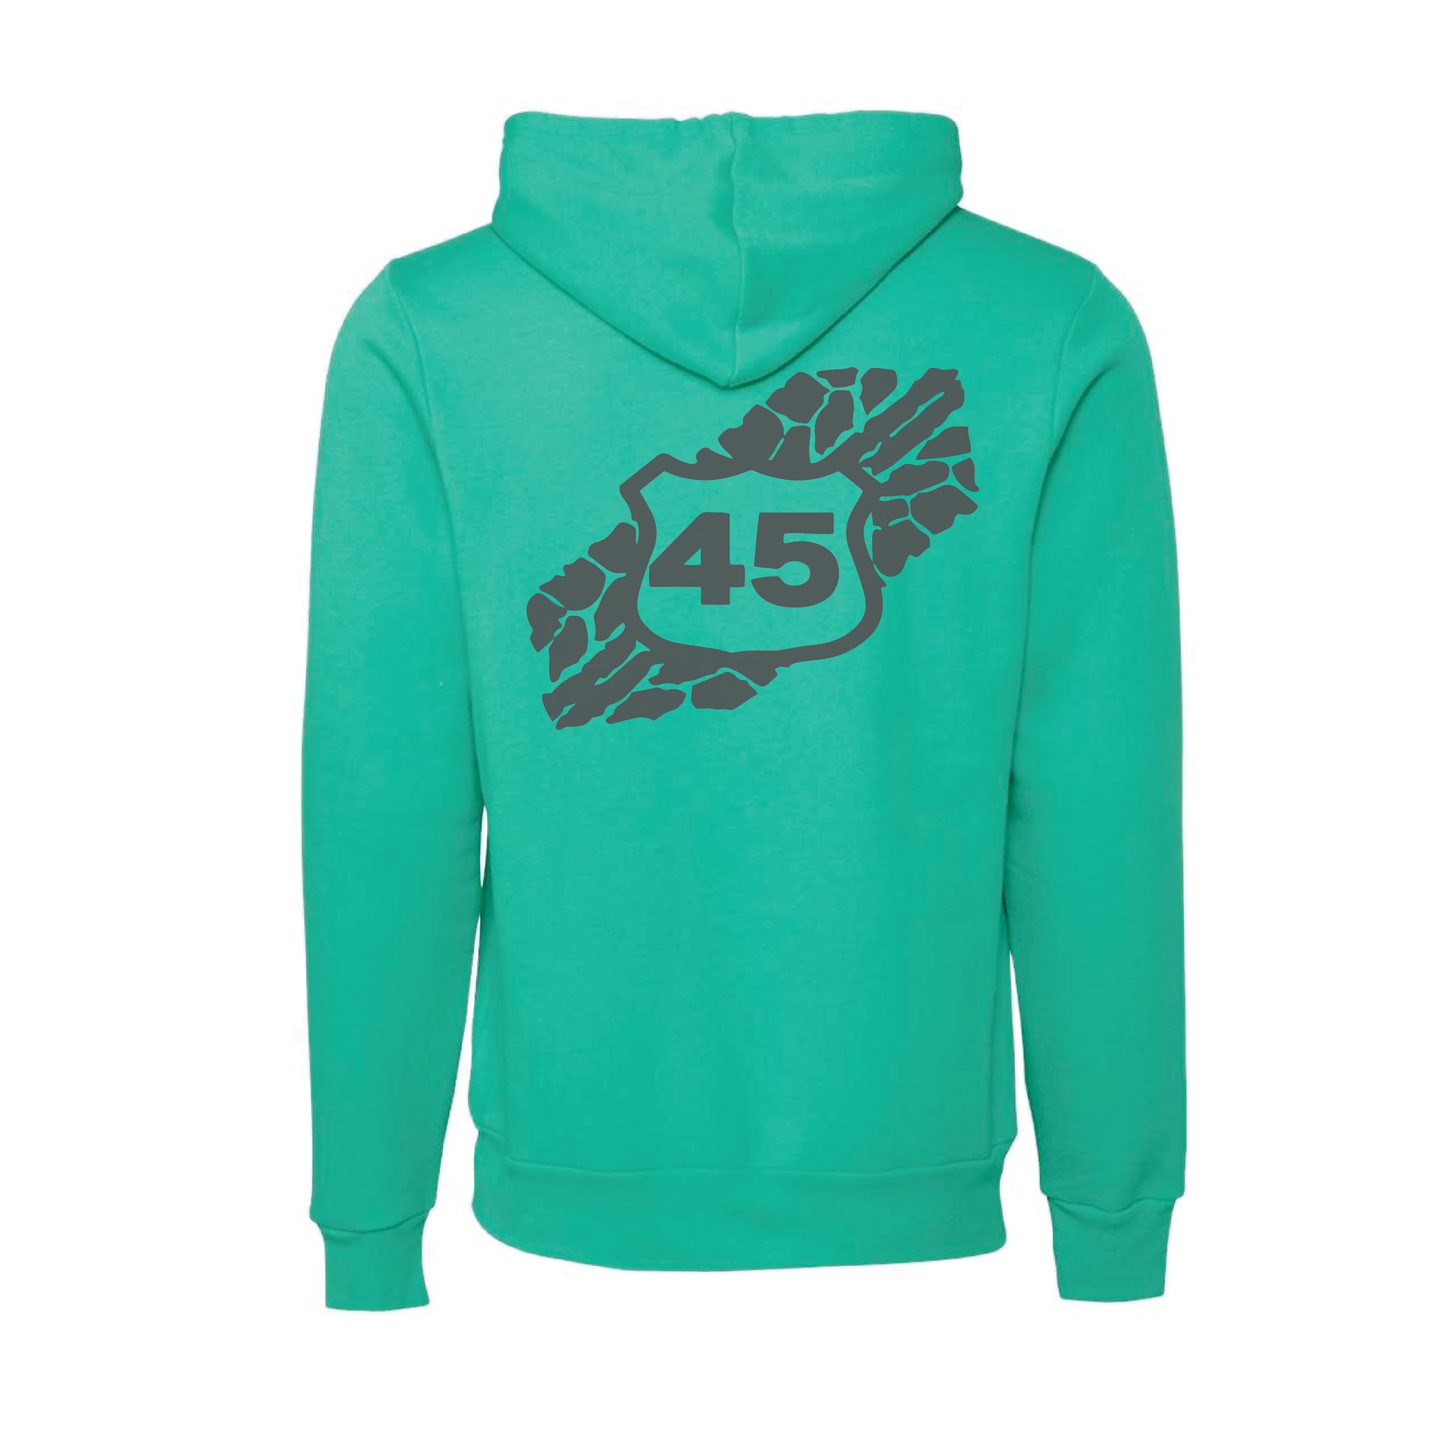 45 South Apparel (Front and Back T-Shirt) - Shirt, Tank Top, Long Sleeve or Hoodie - Available in Multiple Colors